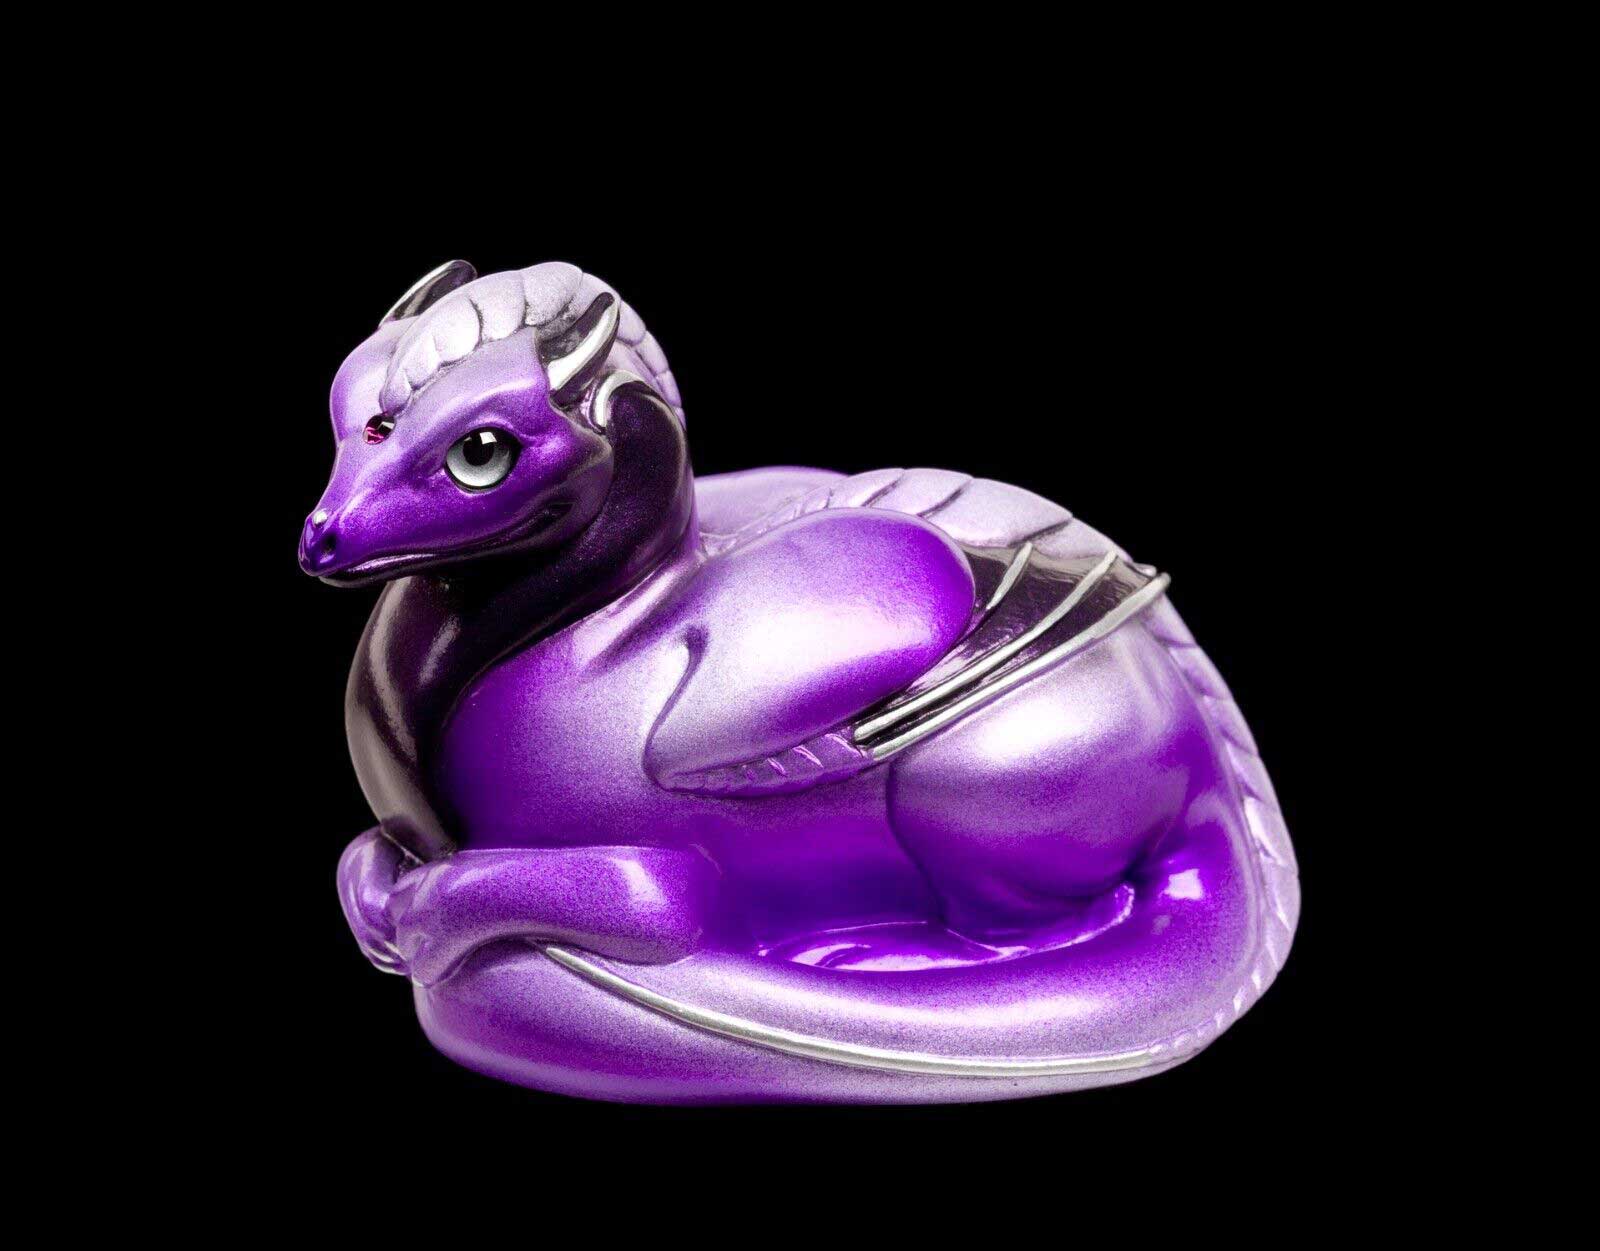 20221014-Twilight-Amethyst-Pebble-Loaf-Dragon-Test-Paint-1-by-Gina